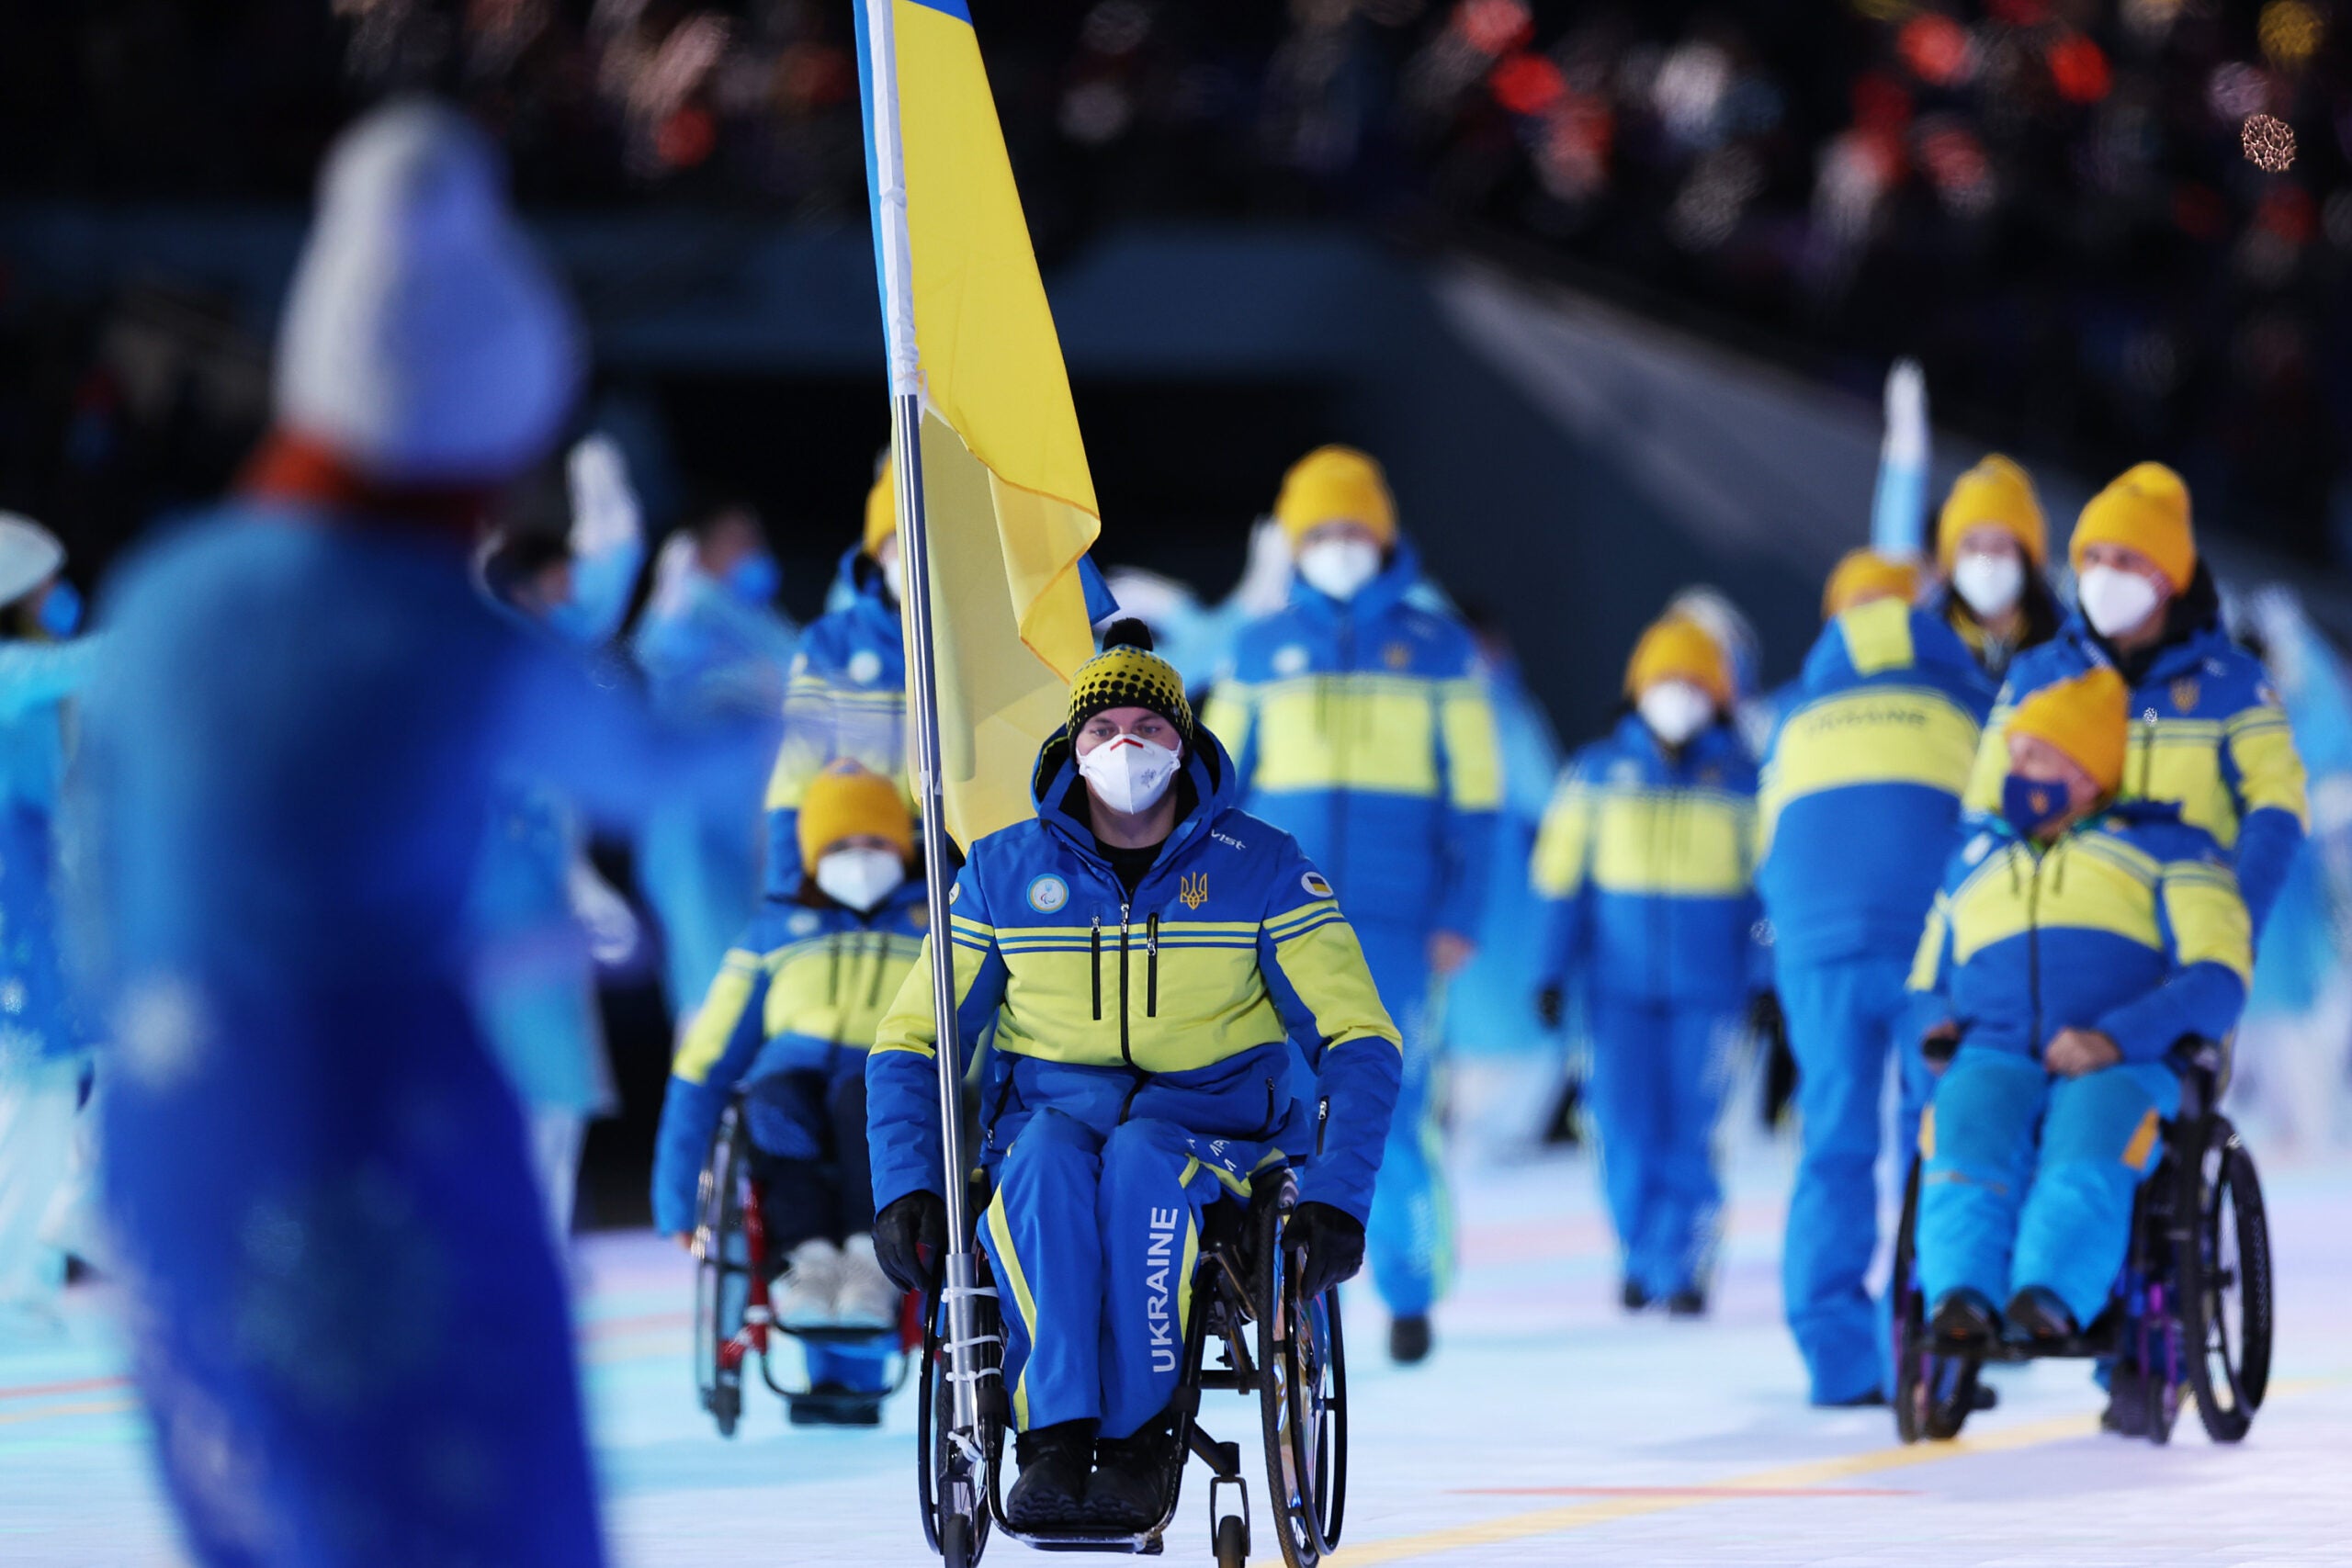 VISUALLY IMPAIRED SPORTS IN THE 2022 WINTER PARALYMPICS - VIA